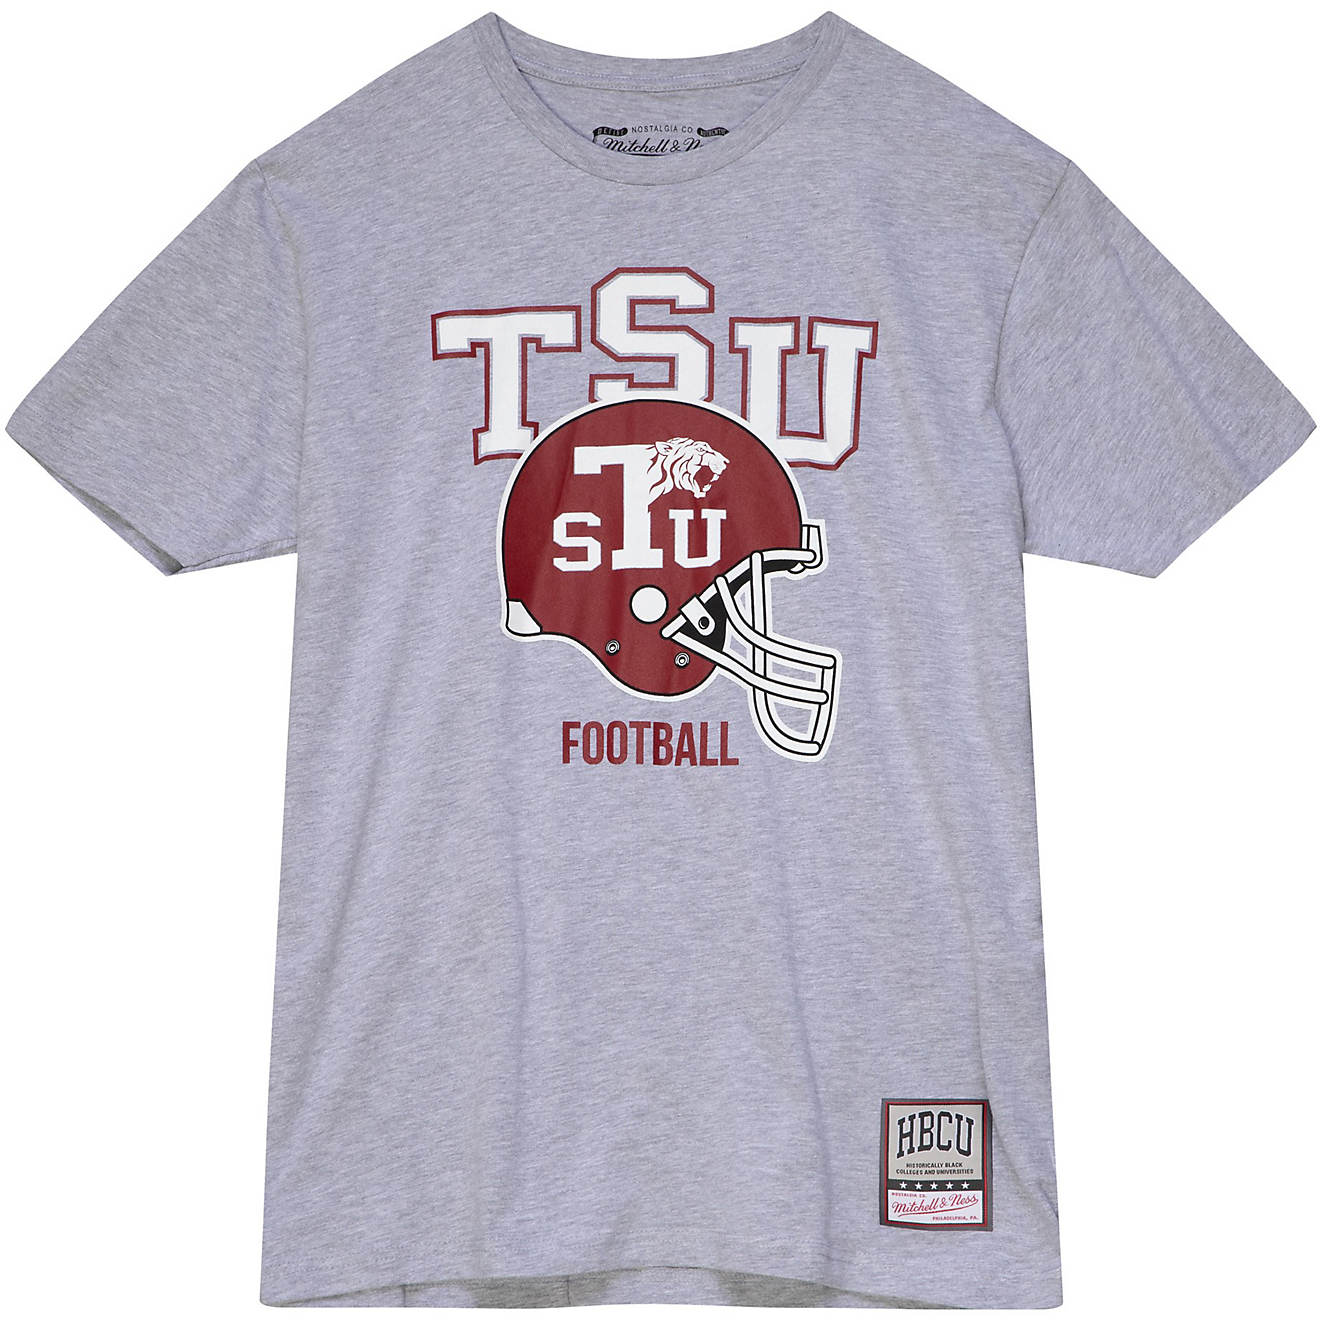 Mitchell & Ness Men's Texas Southern University Football T-shirt                                                                 - view number 1